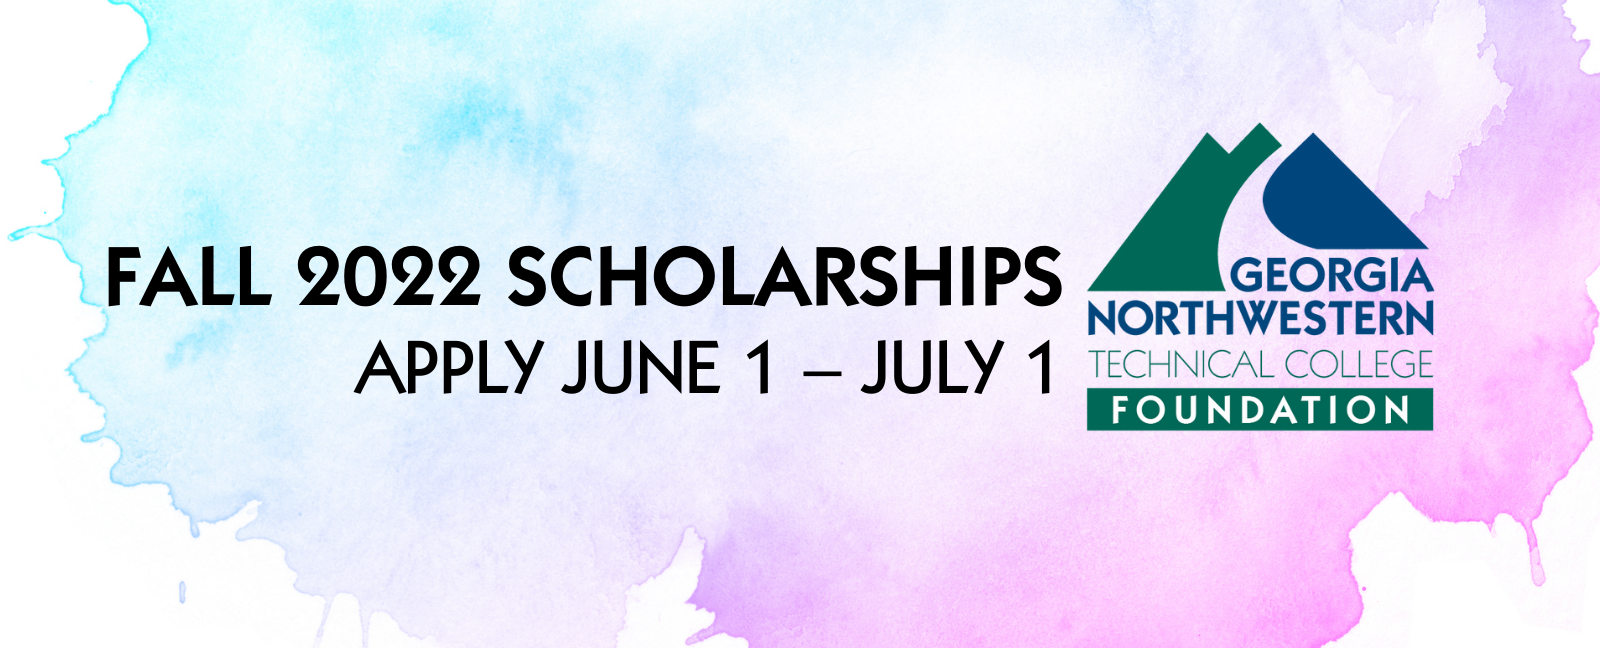 GNTC Foundation Scholarships Apply June 1-July 1 for Fall 2022 Scholarships